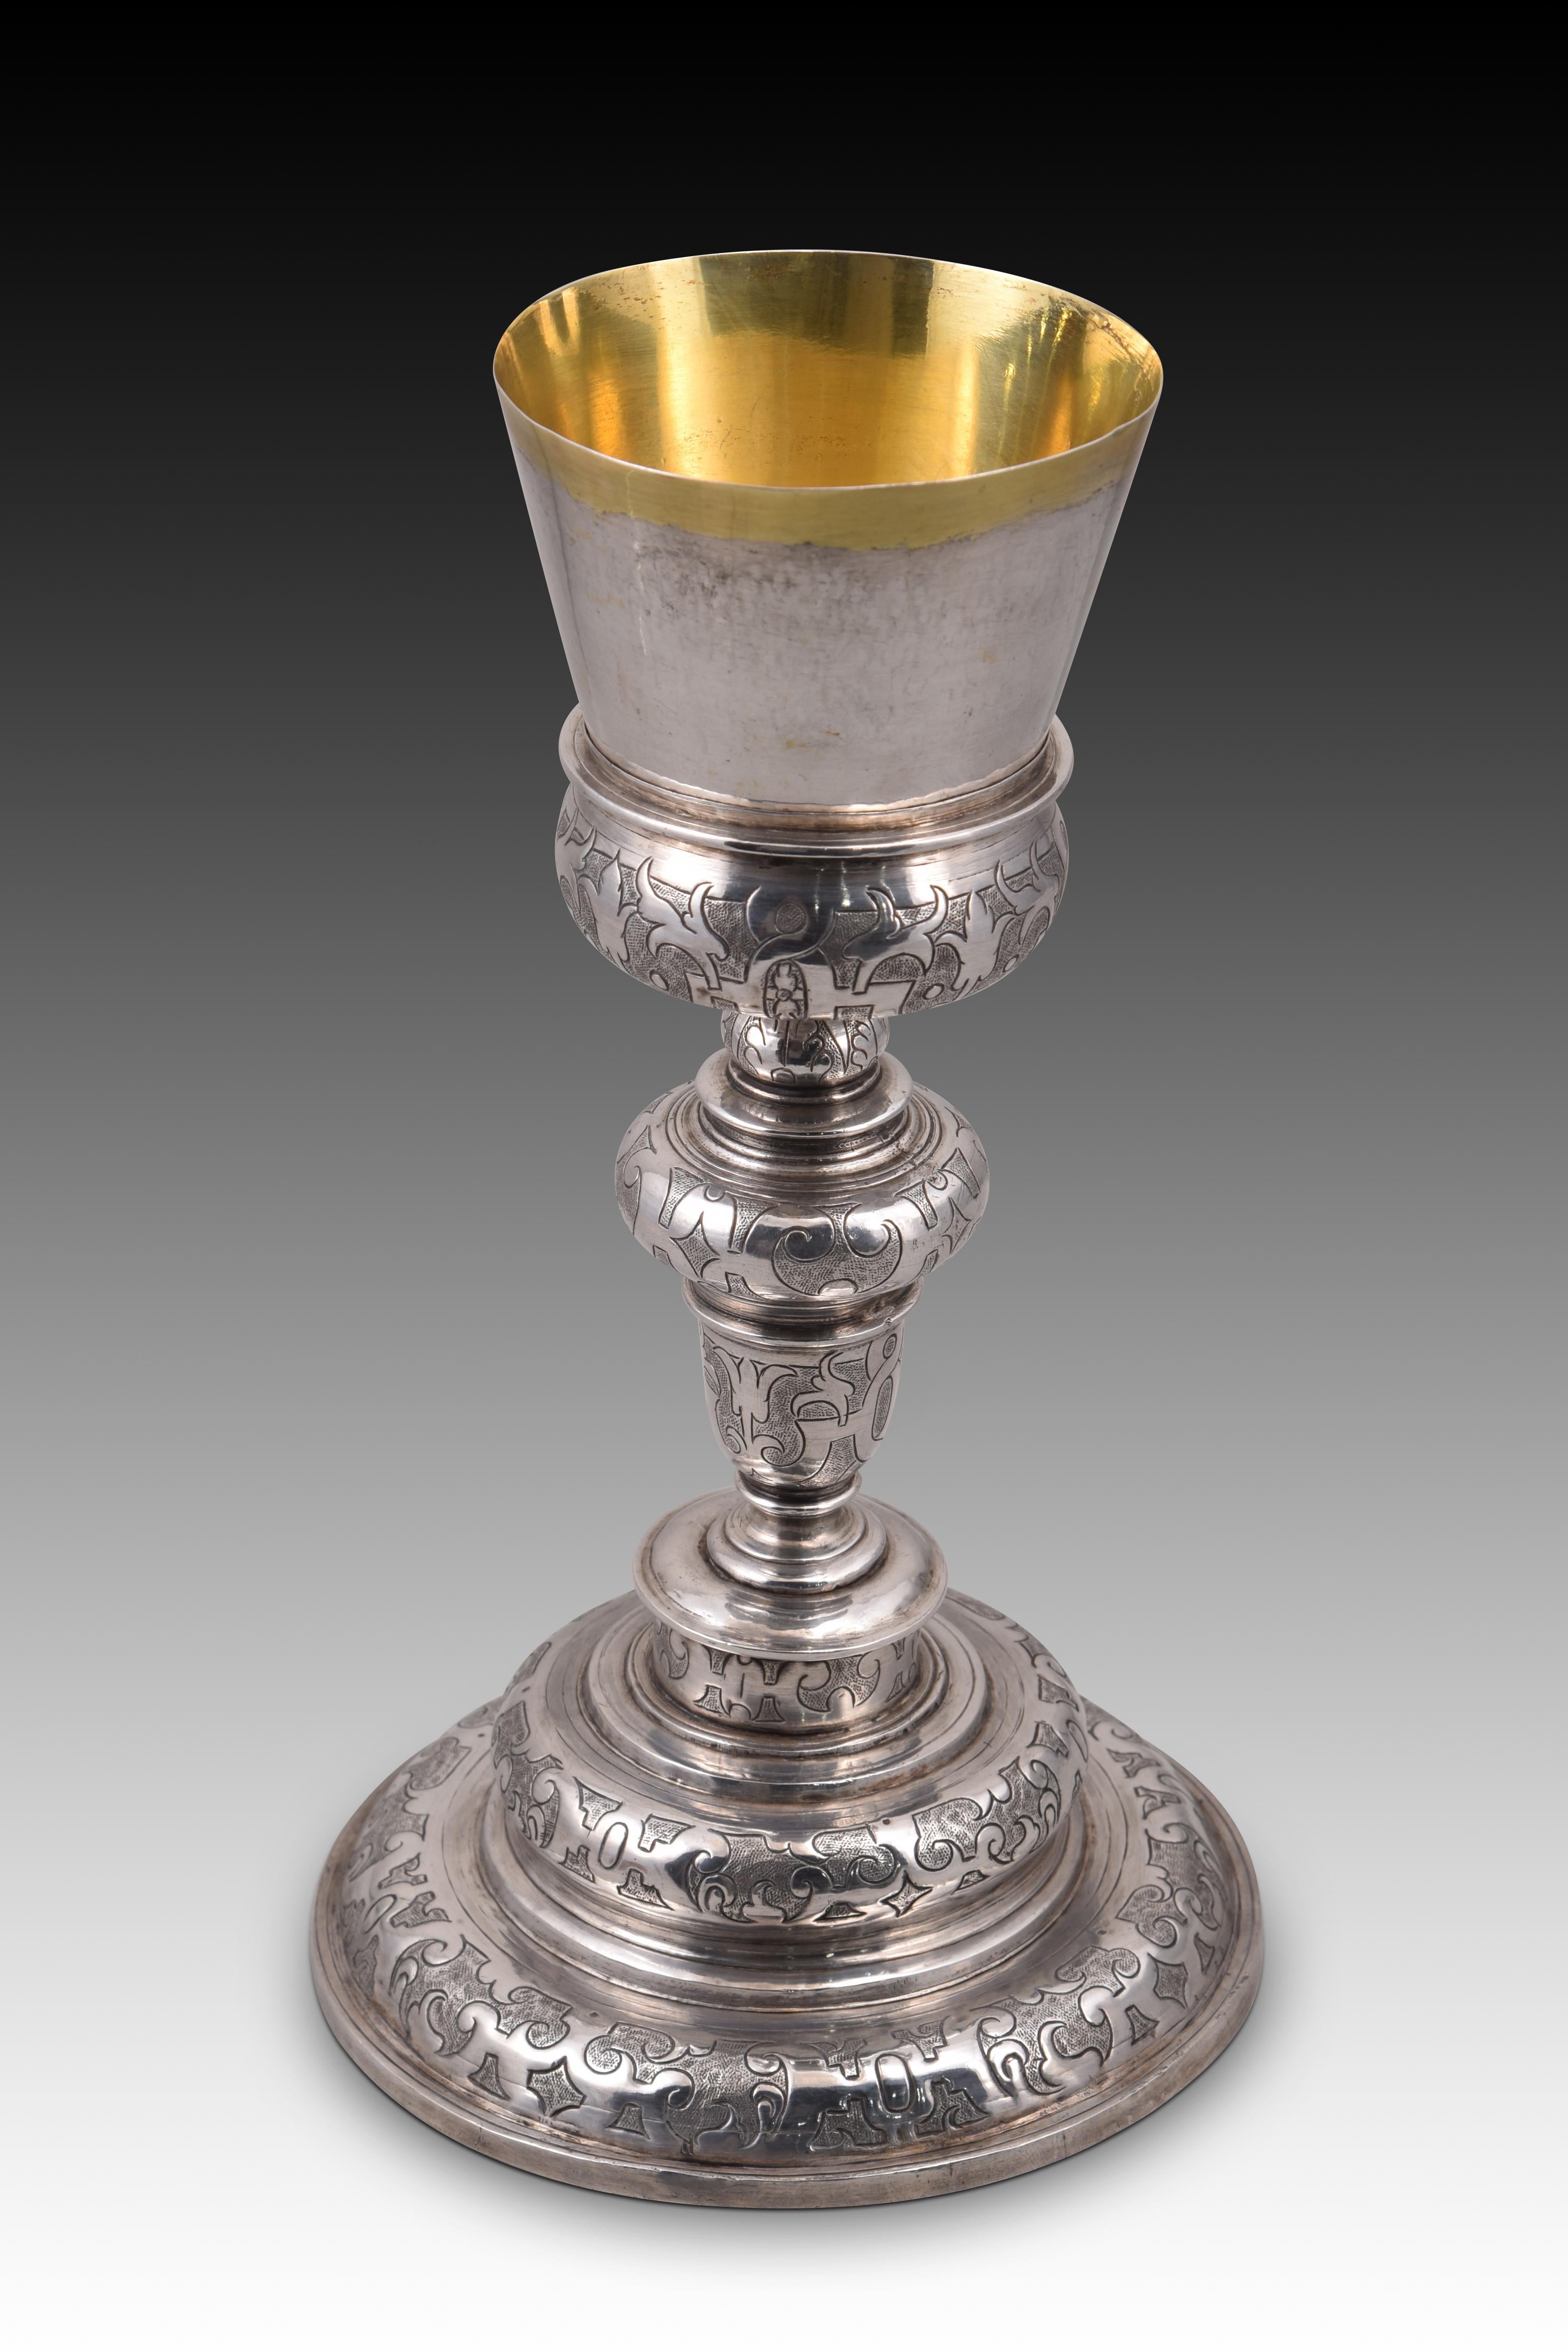 Spanish Solid silver chalice. Spain, 17th century